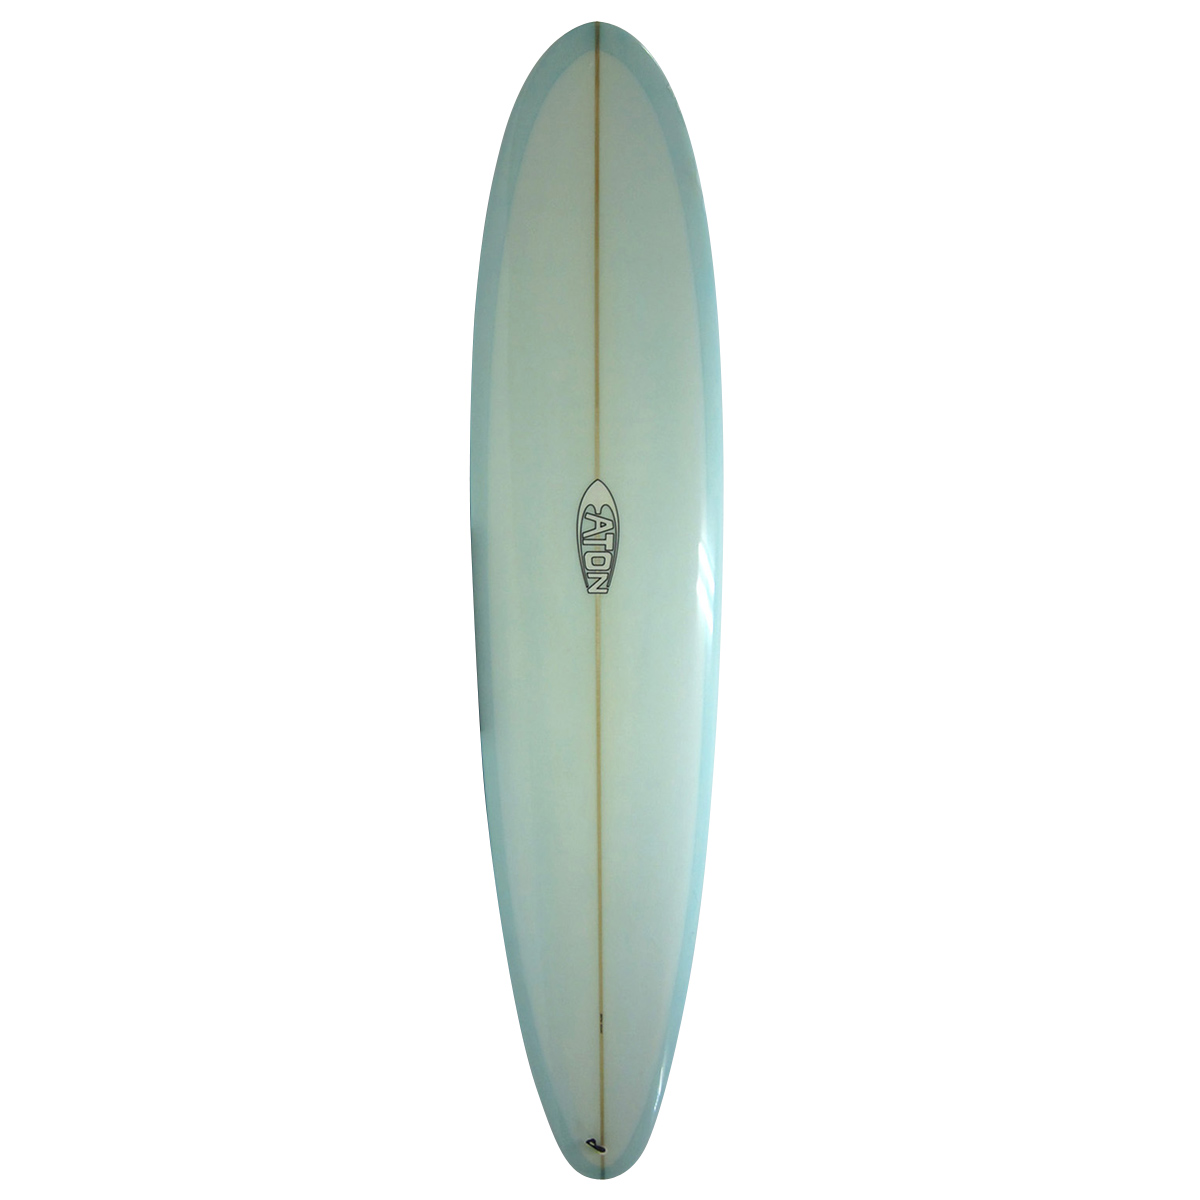  / EATON SURFBOARDS / 9`3 Bonzer Shaped By Mike Eaton